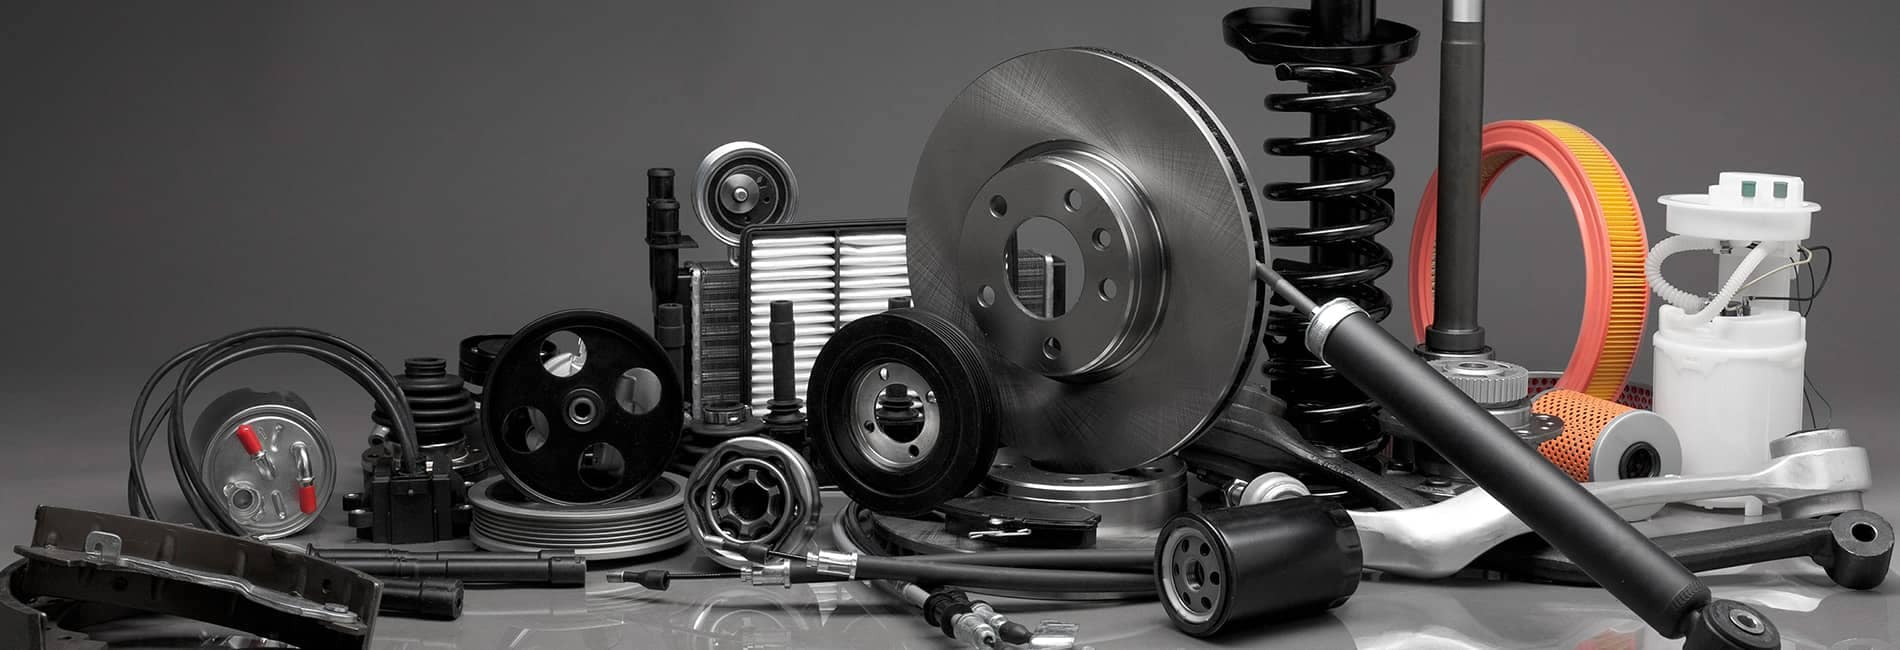 Why You Should Only Use Genuine OEM Parts | Victoria, TX